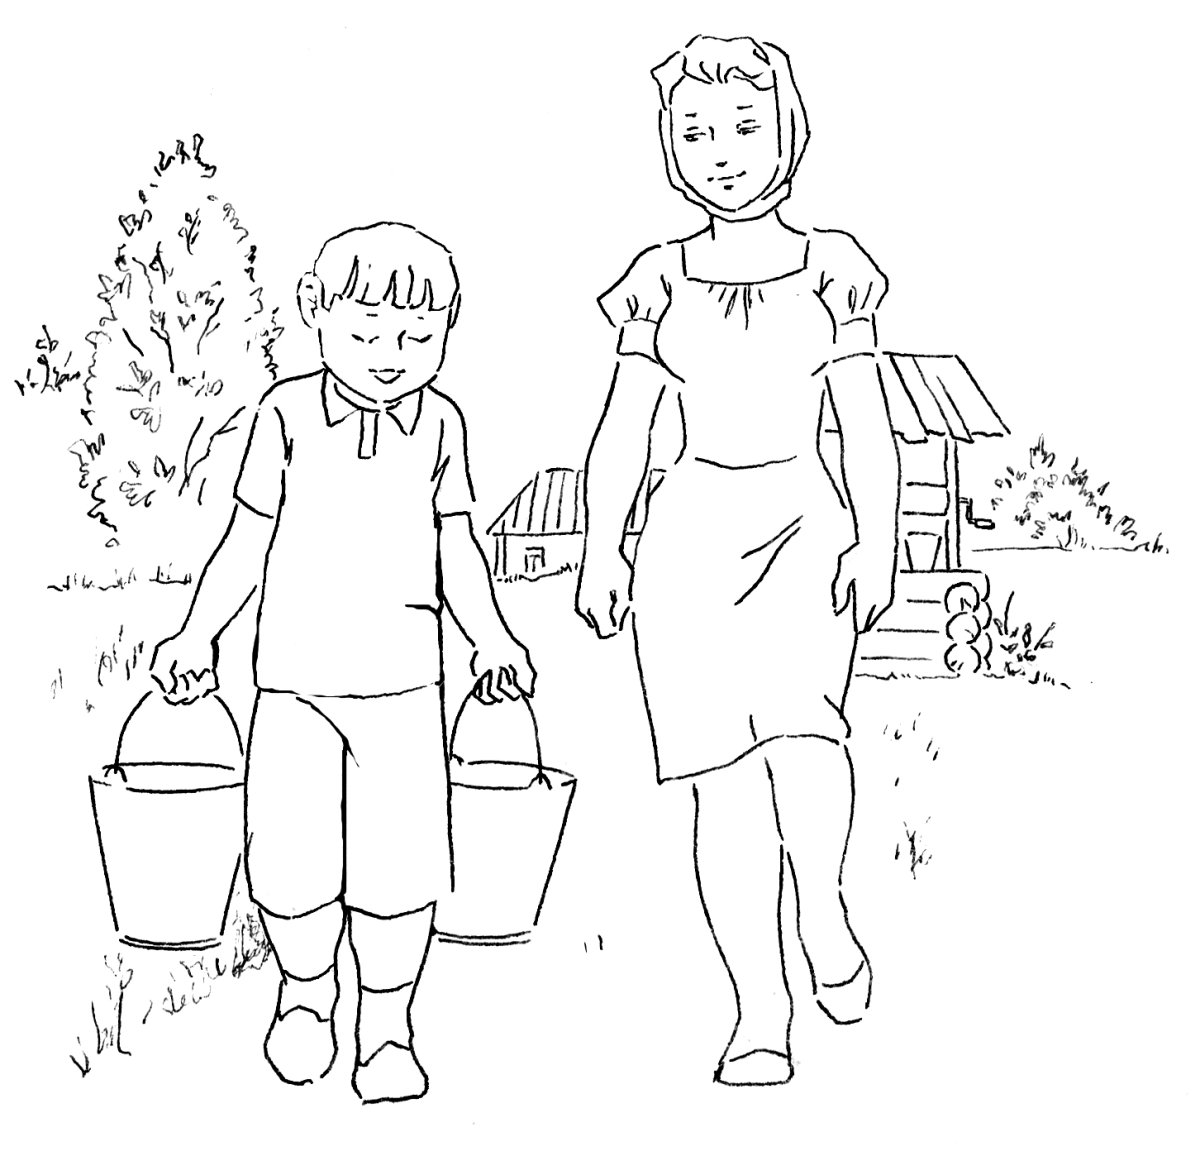 Coloring page witty good deeds